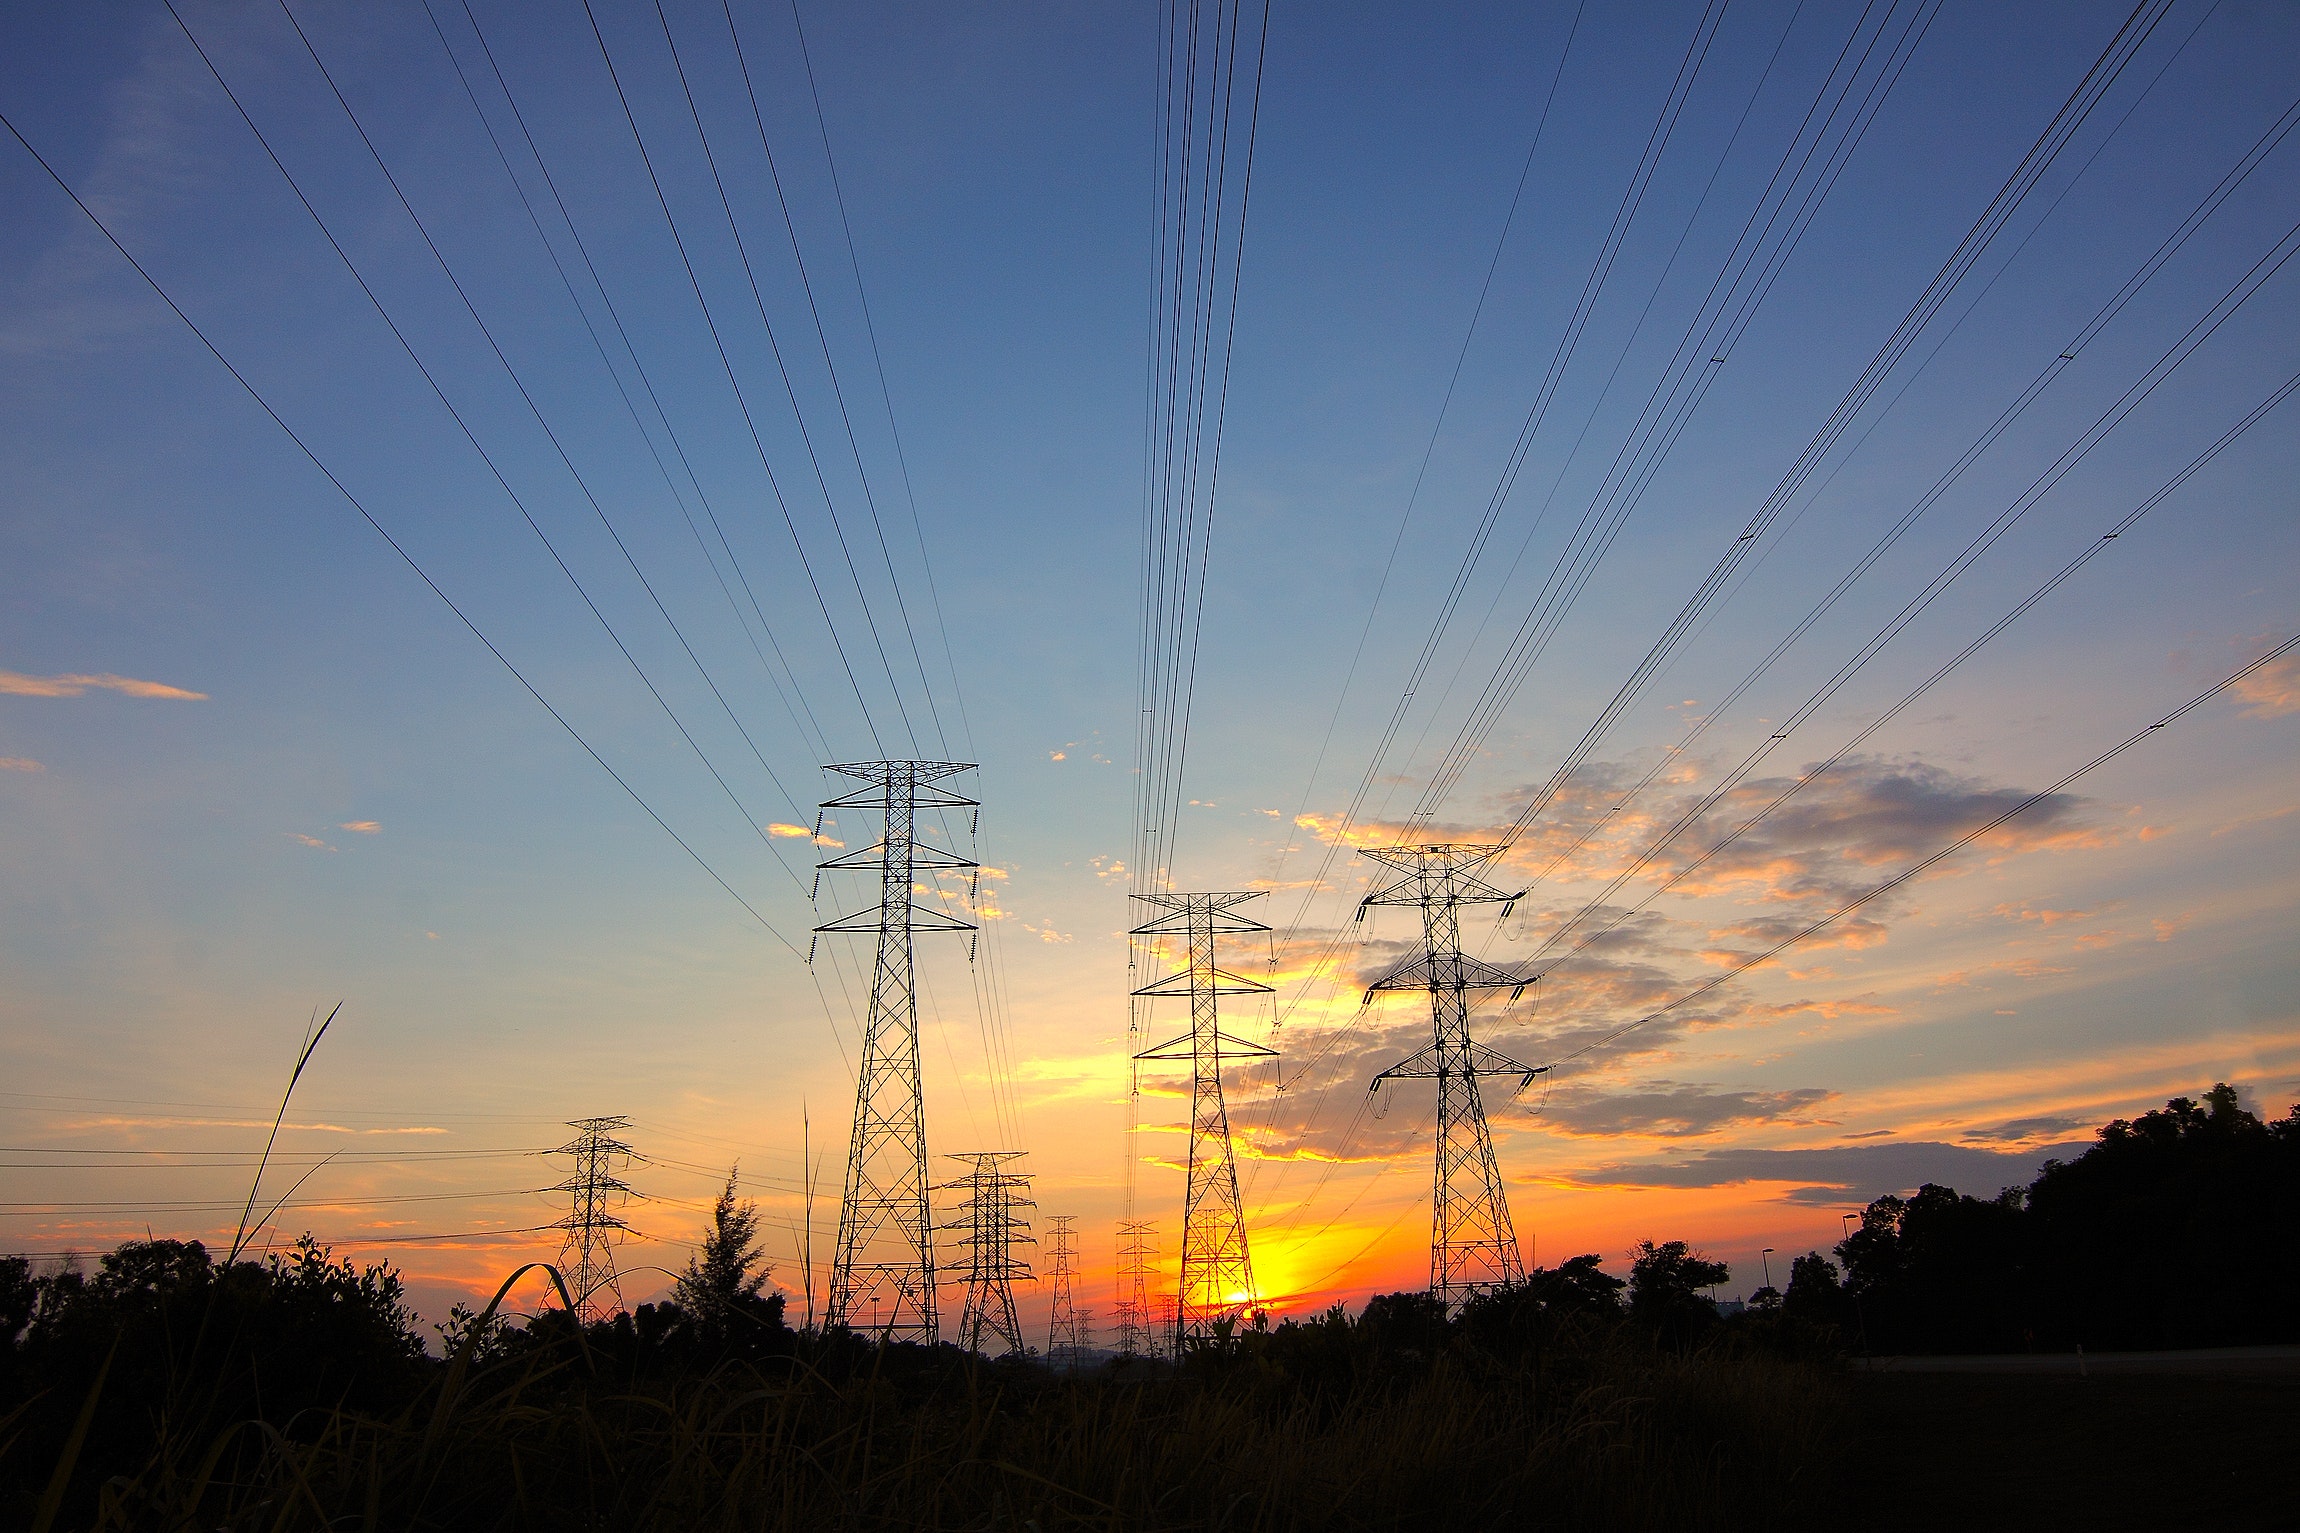 Learning from the power cut: 7 ways to make the UK energy system more resilient